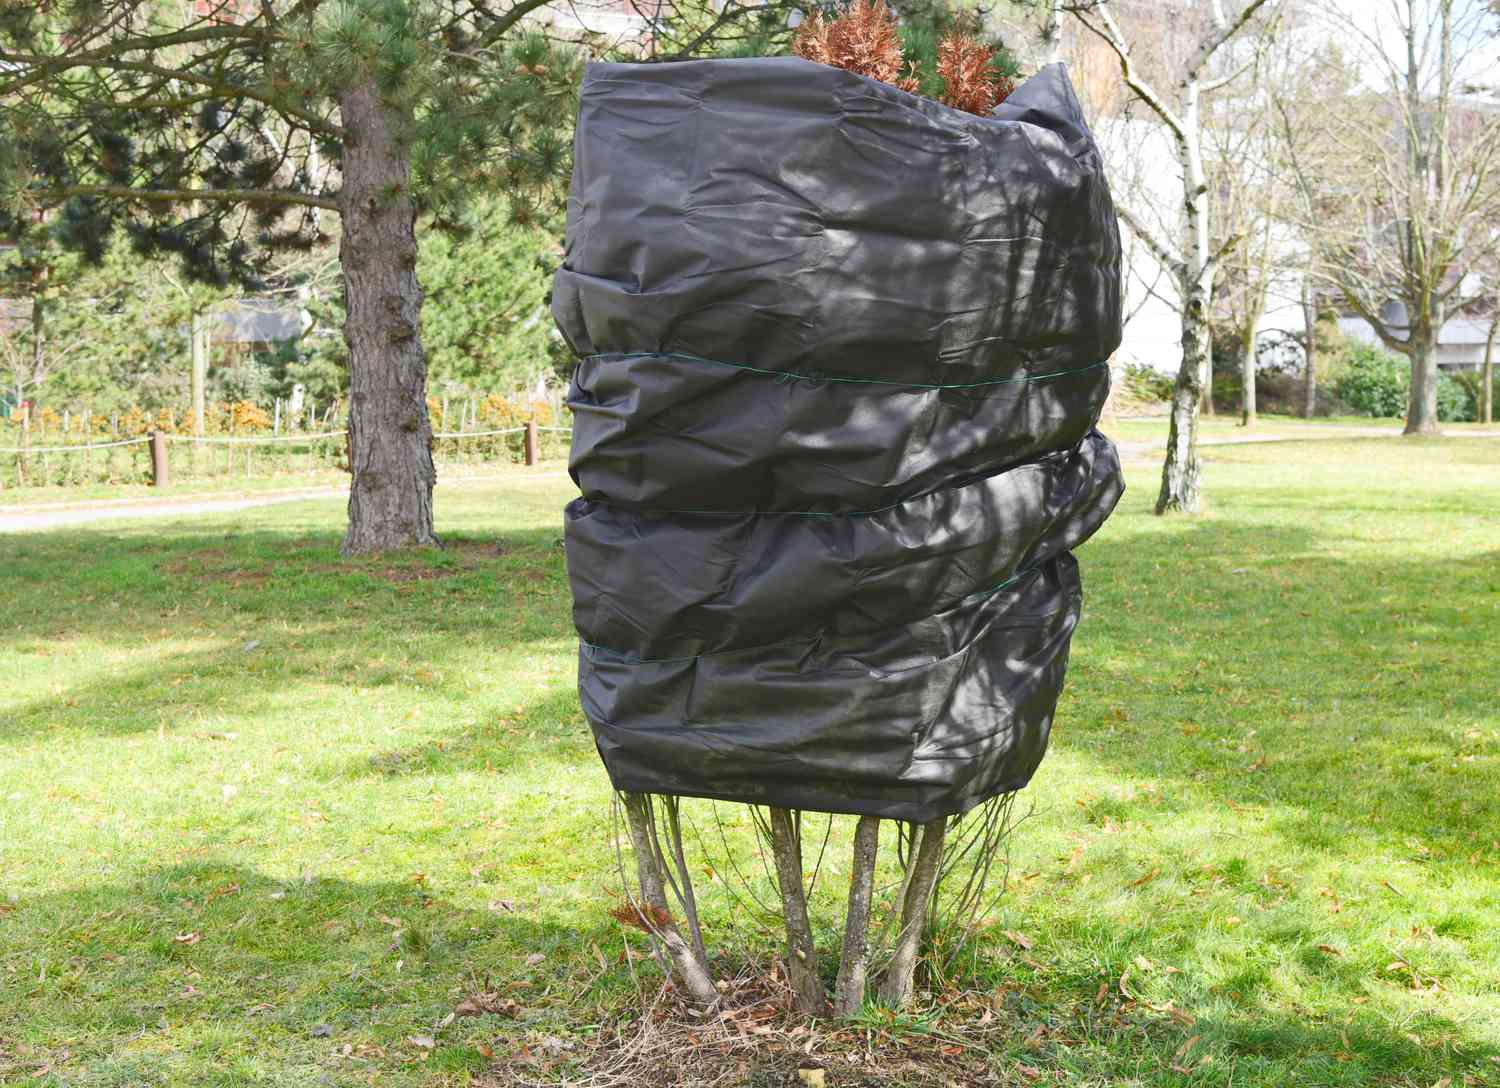 Arborvitae tree wrapped in black and tied to prevent leaves turning brown